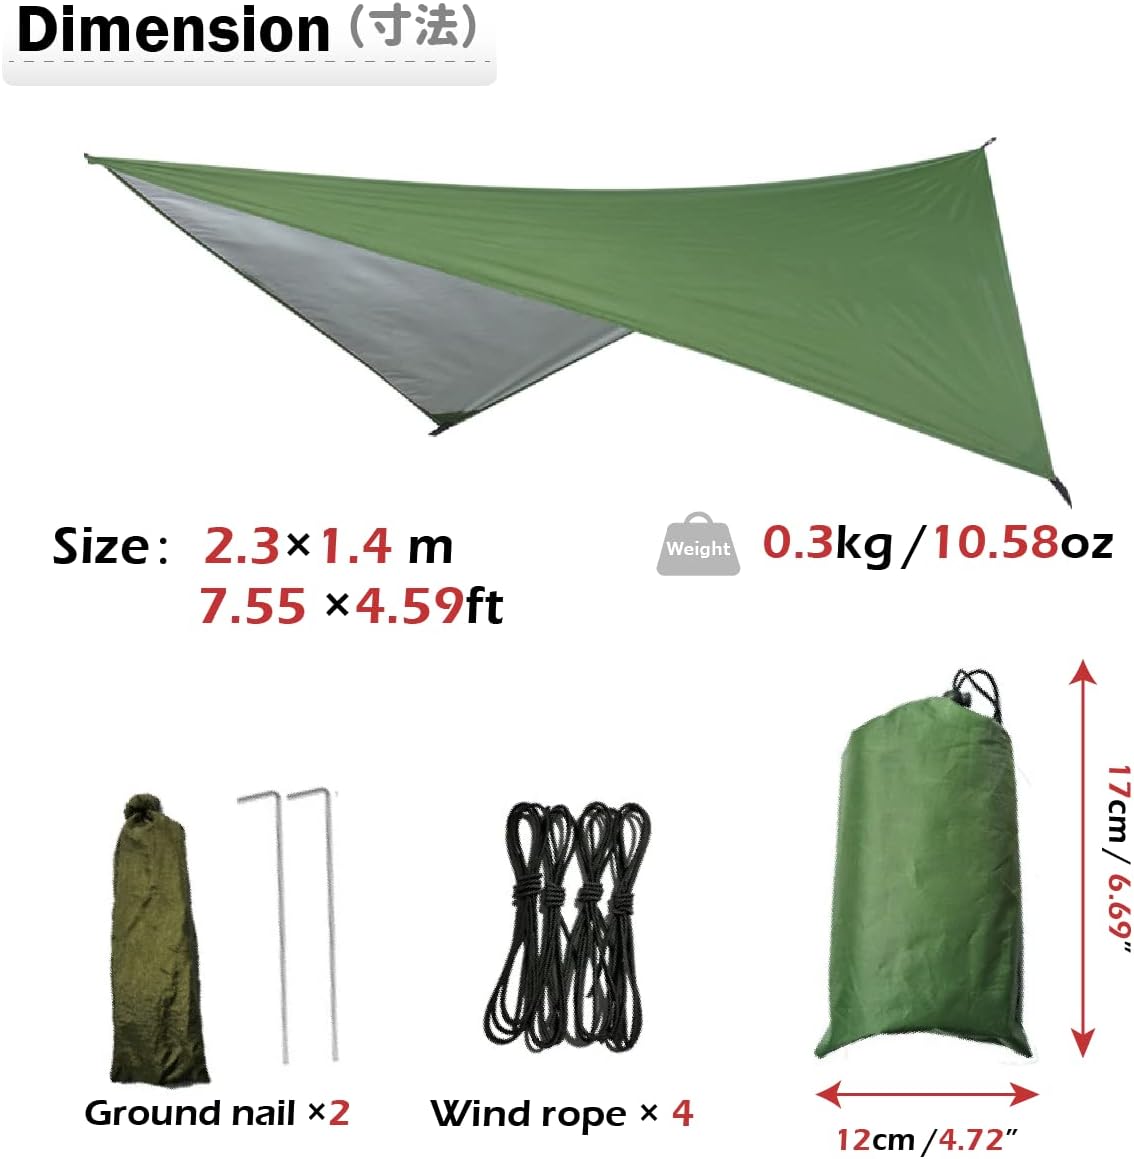 Hammock Camping Tarp Rain Fly, Waterproof Camping Tarp Portable Tent Tarp Premium Backpacking Tarp Sheleter with UV Protection Layer for Camping Hiking Outdoor Beach Backpacking - Included Guy Lines & Stakes - Delicate Leather